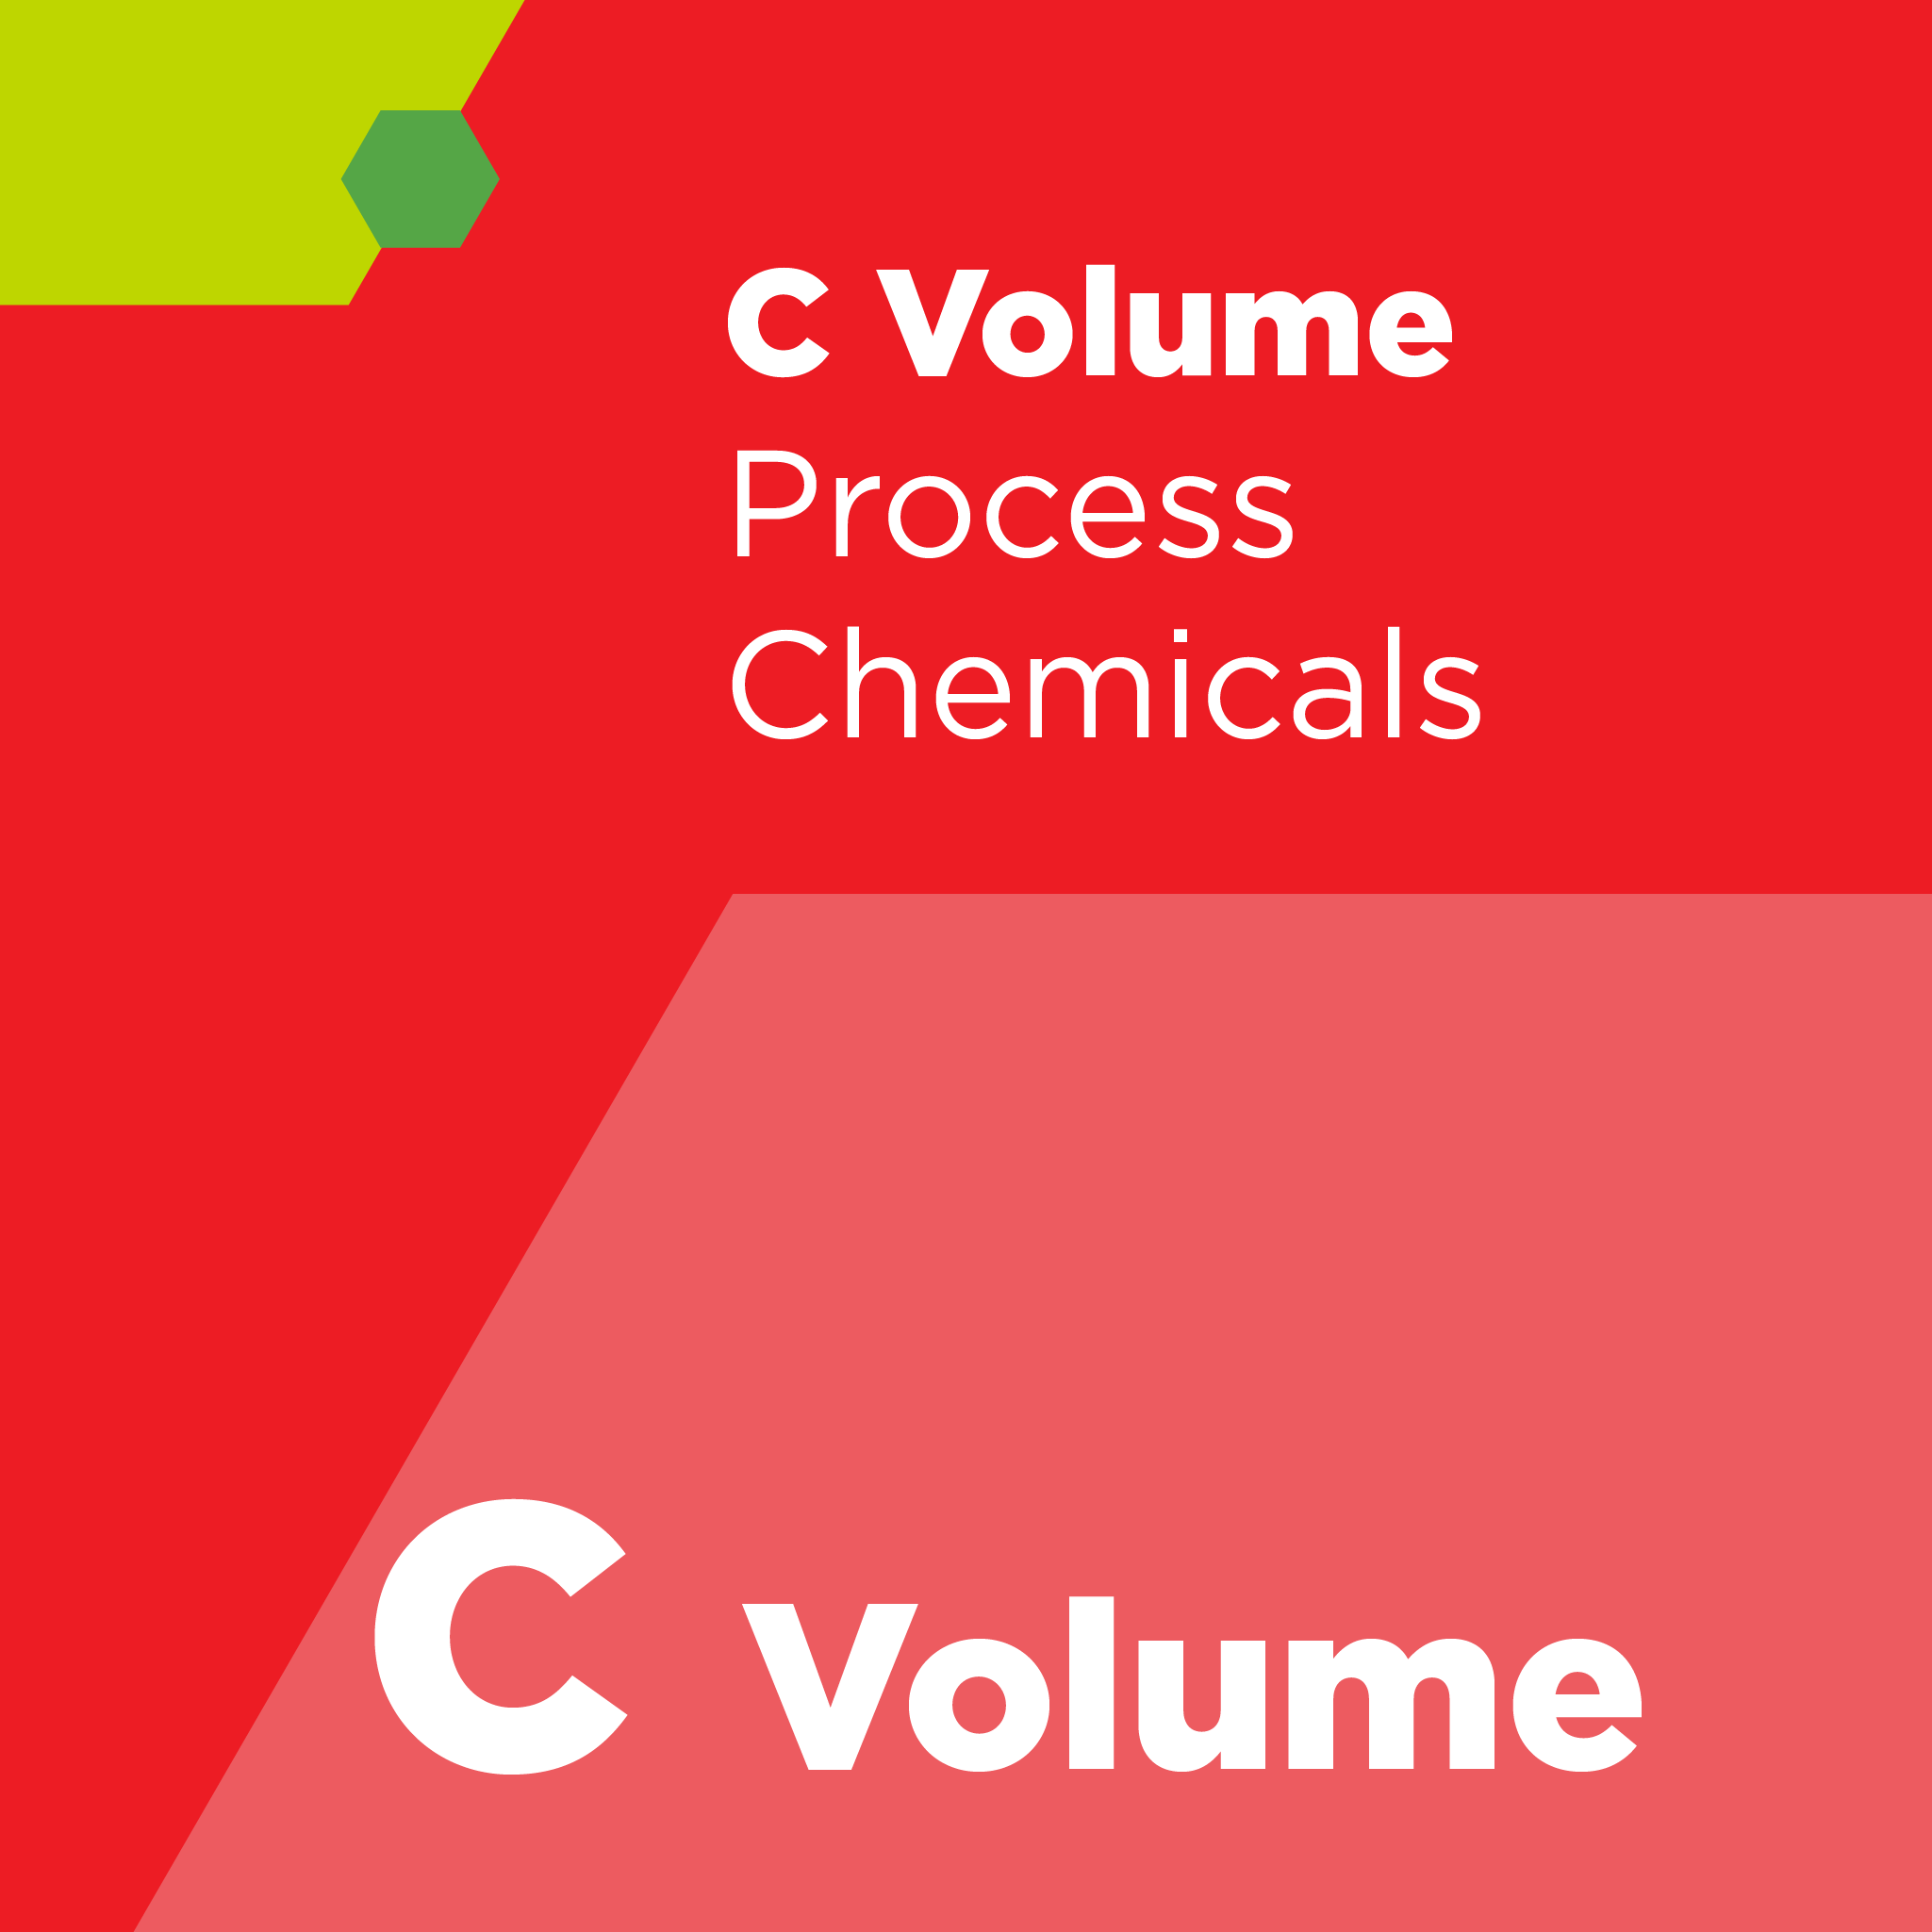 C04400 - SEMI C44 - Specification and Guide for Sulfuric Acid